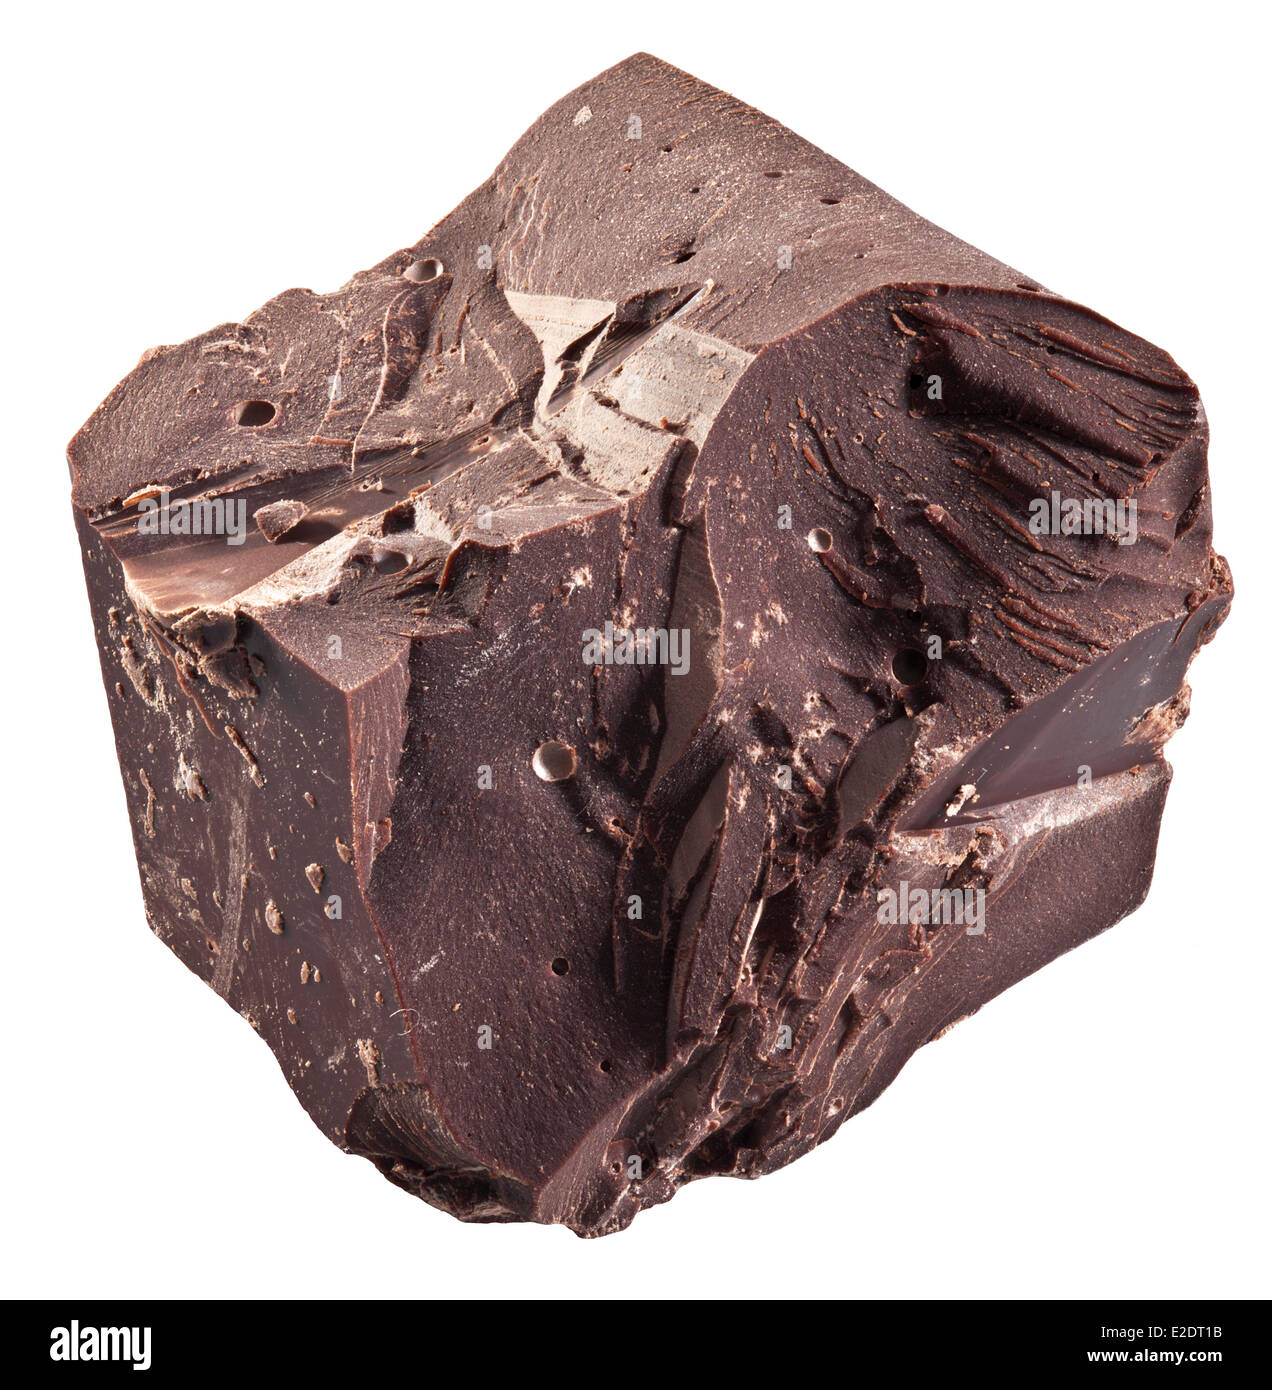 One chocolate block isolated on a white background. Stock Photo